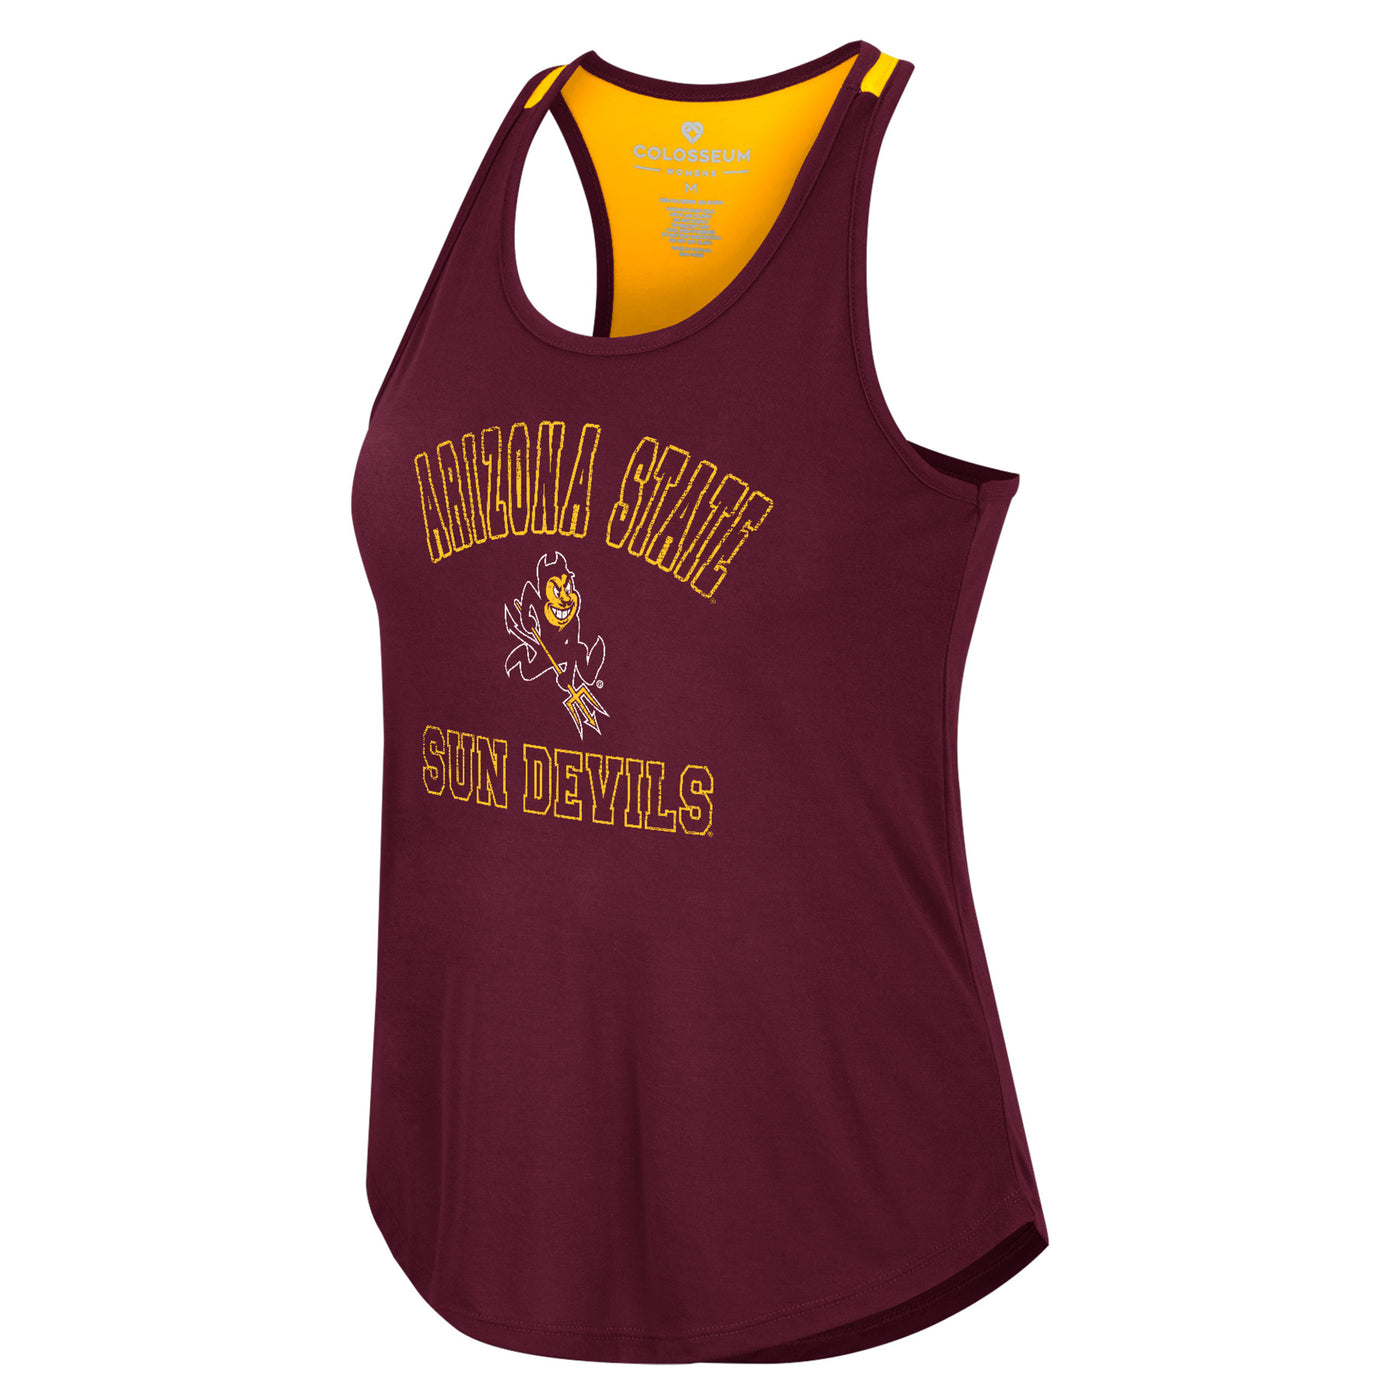 ASU maroon womens tank with the text 